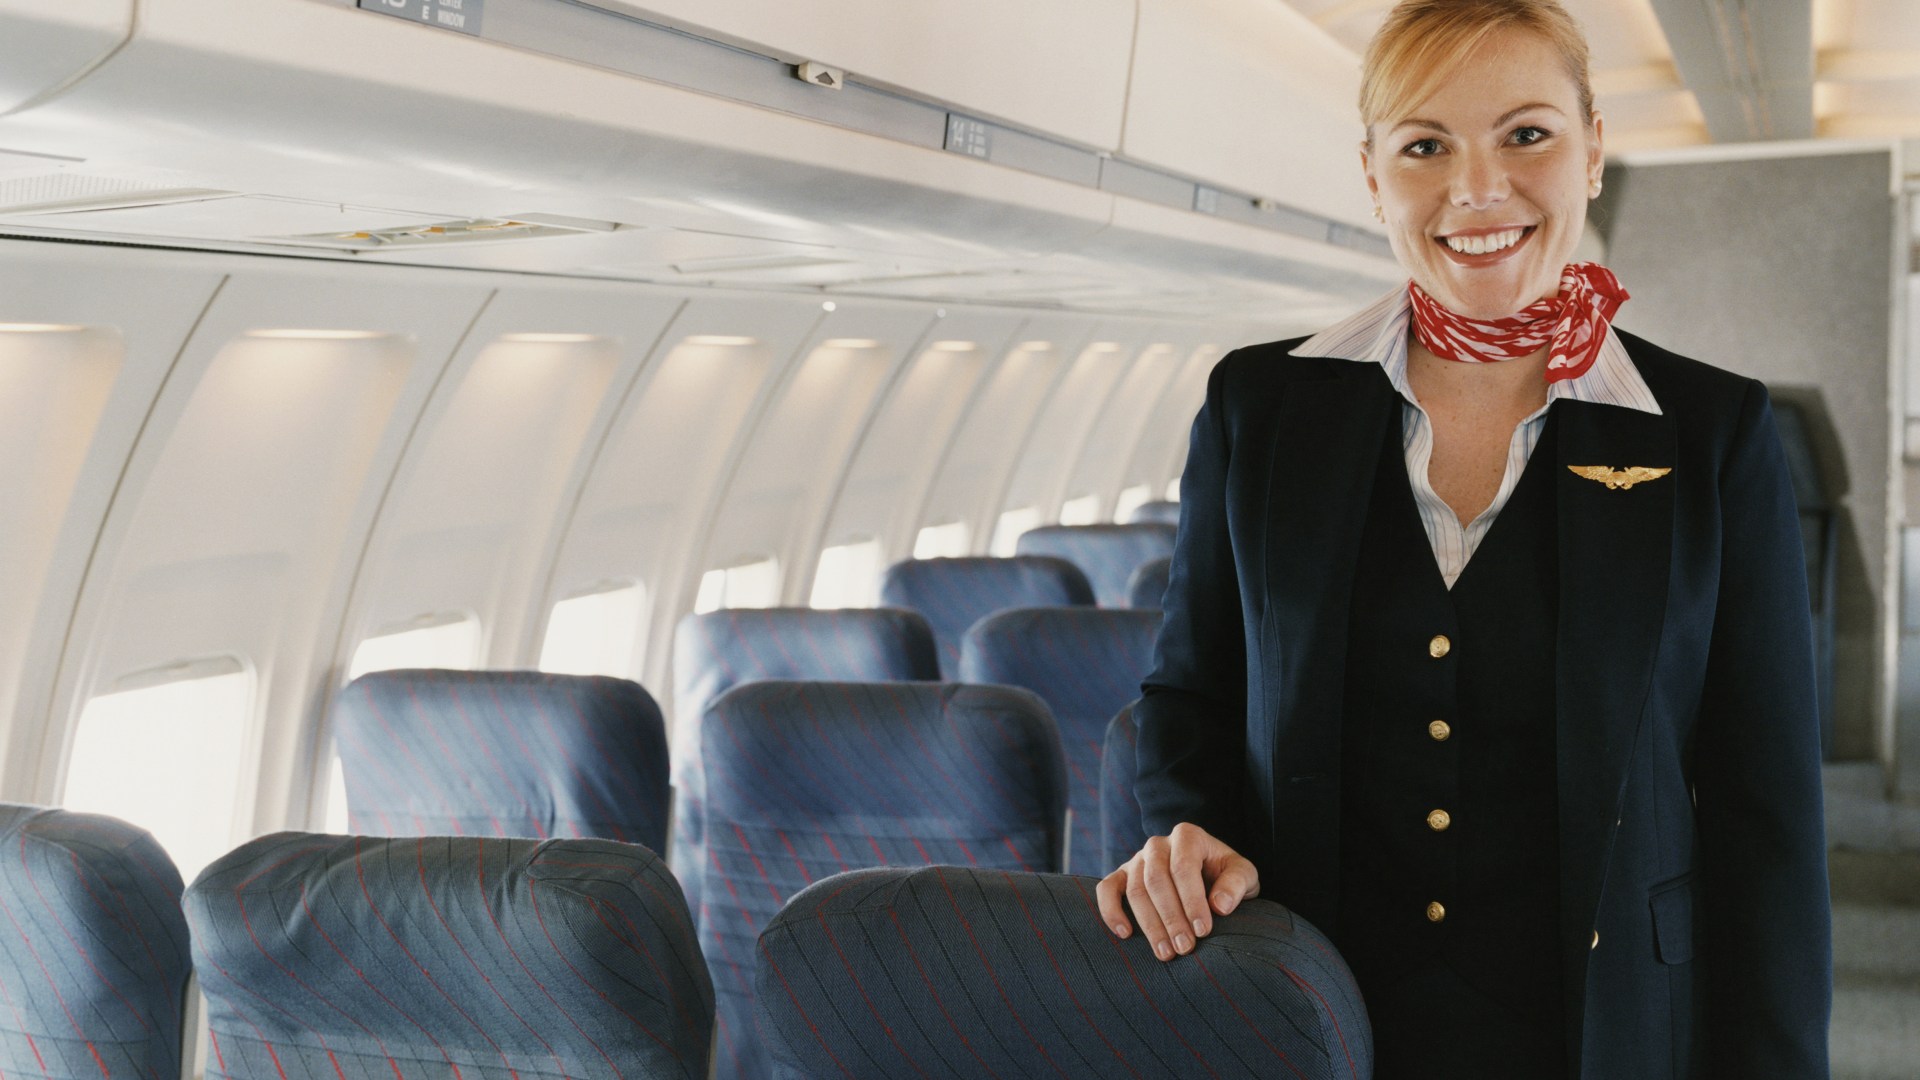 Unlock the Secret: Why Booking Mid-Morning Flights Is Key According to a Flight Attendant